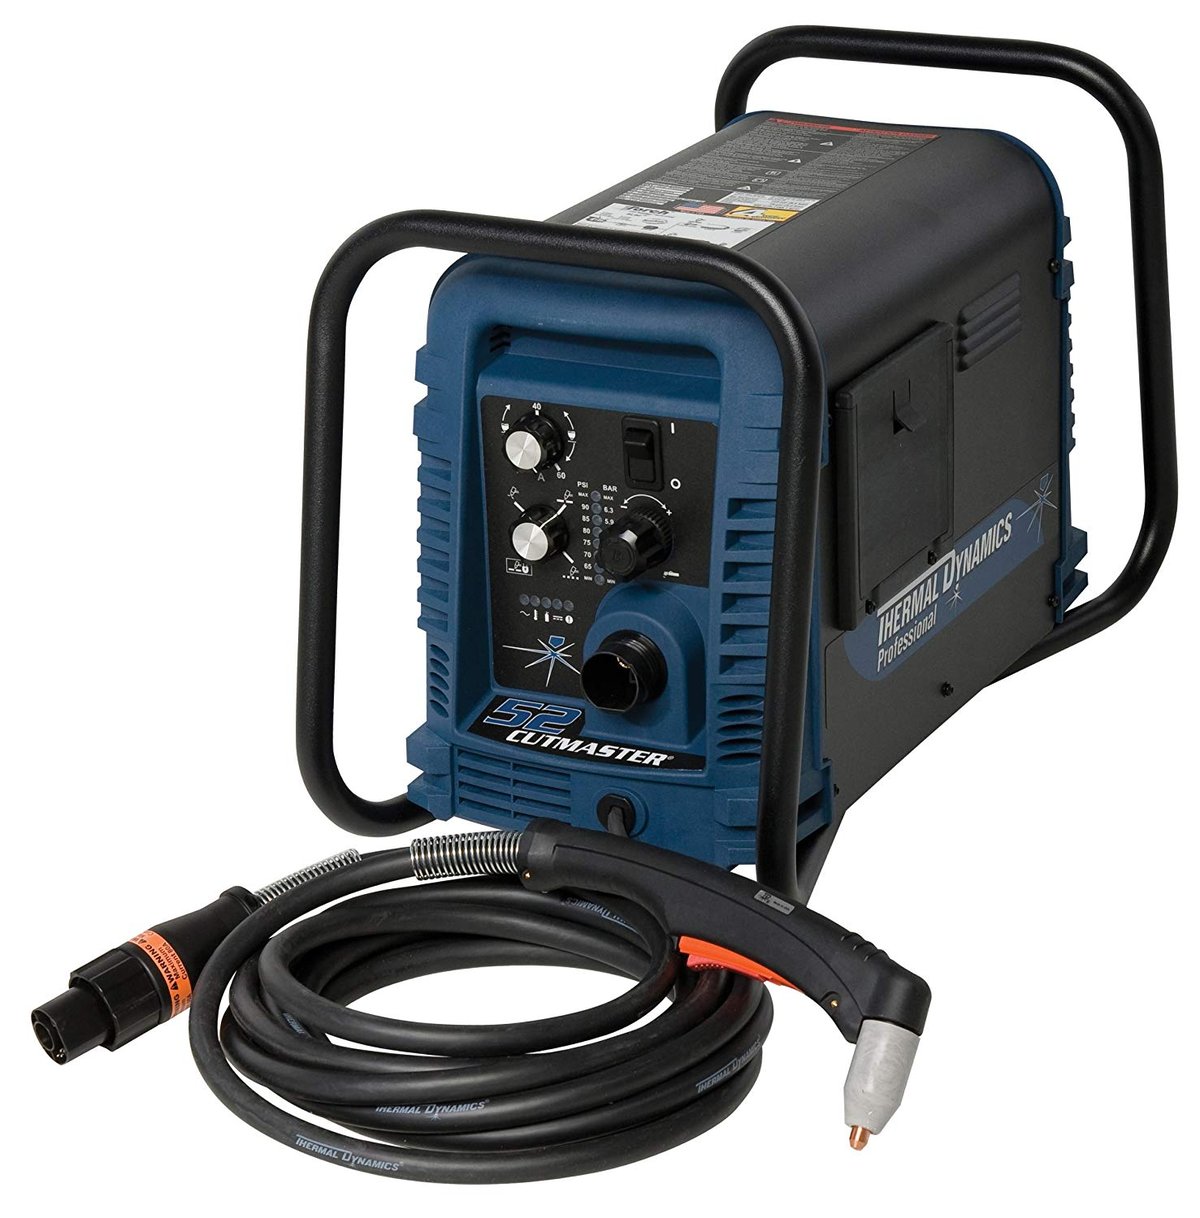 Image of Plasma Cutter Buyer's Guide: Thermal Dynamics Cutmaster 52